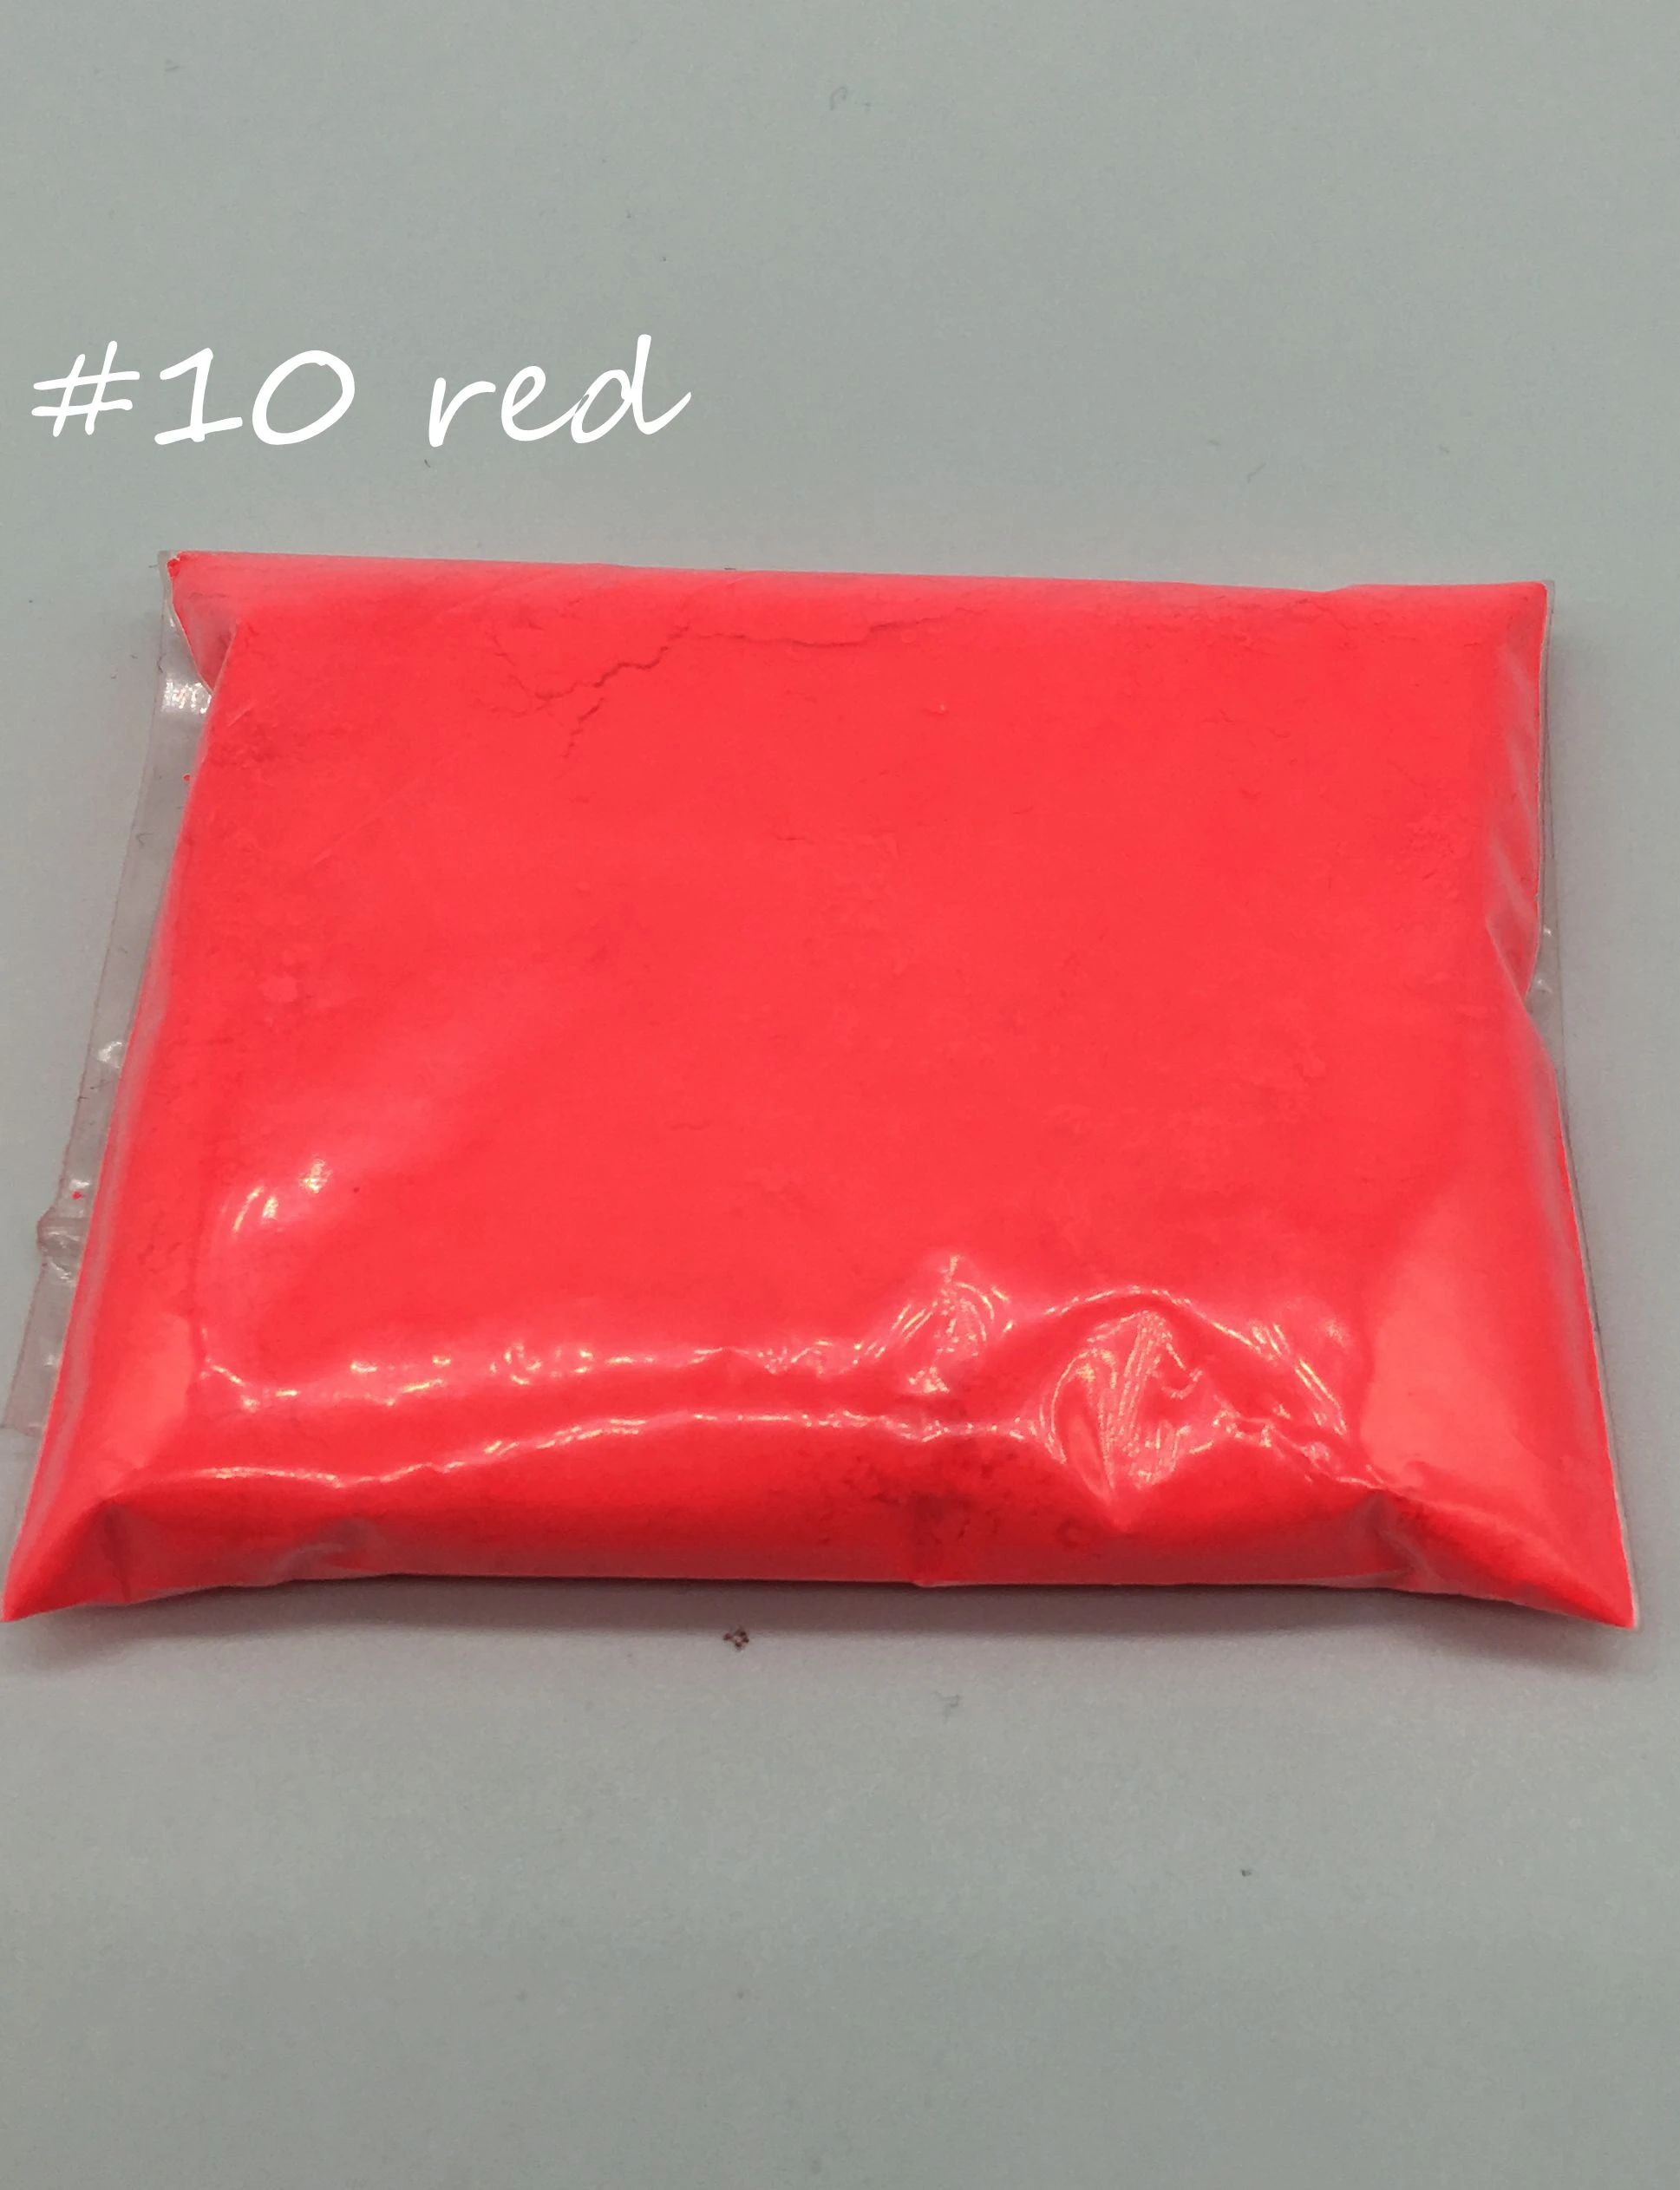 NEON Red Color Fluorescent Powder phosphor Pigment for Paint Printing Soap Neon powder Nail Art Polish,10g/lot,just onbe color